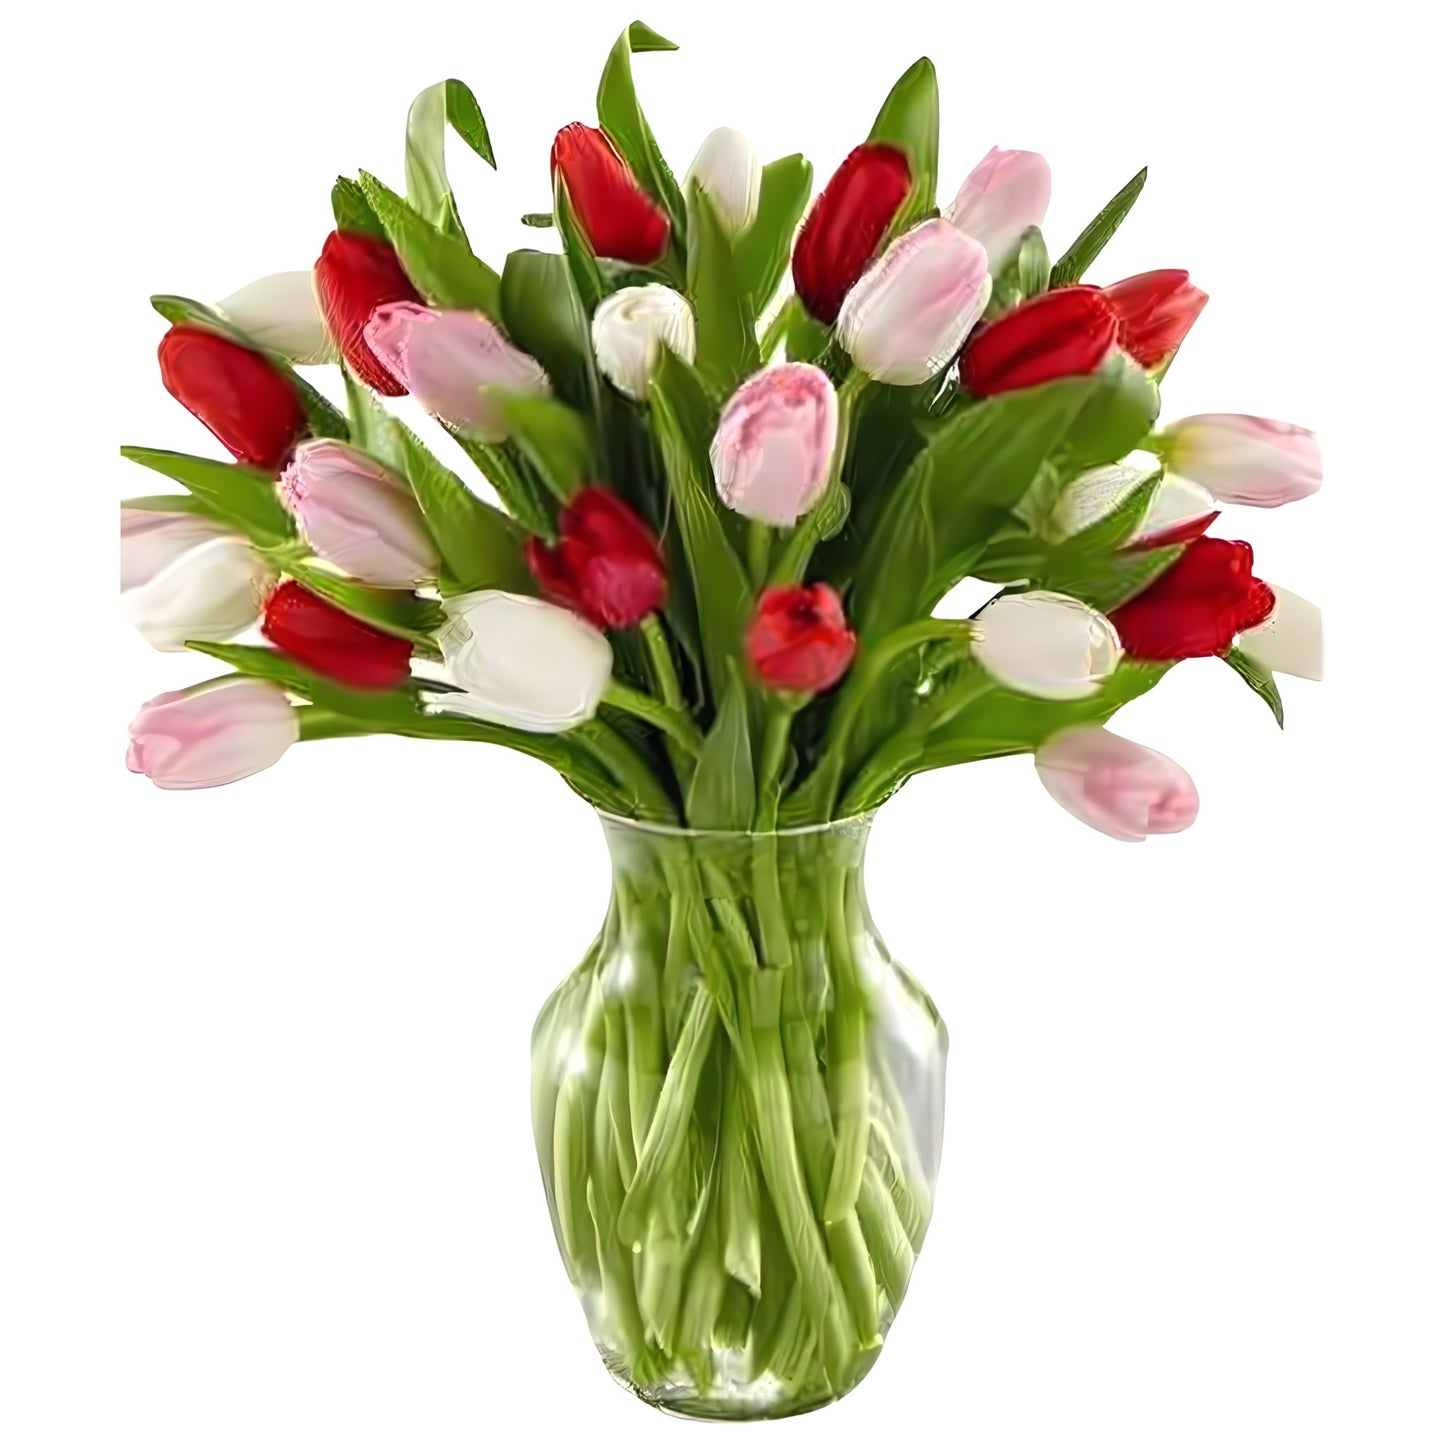 Tulips Of Love - Floral Arrangement - Flower Delivery Brooklyn